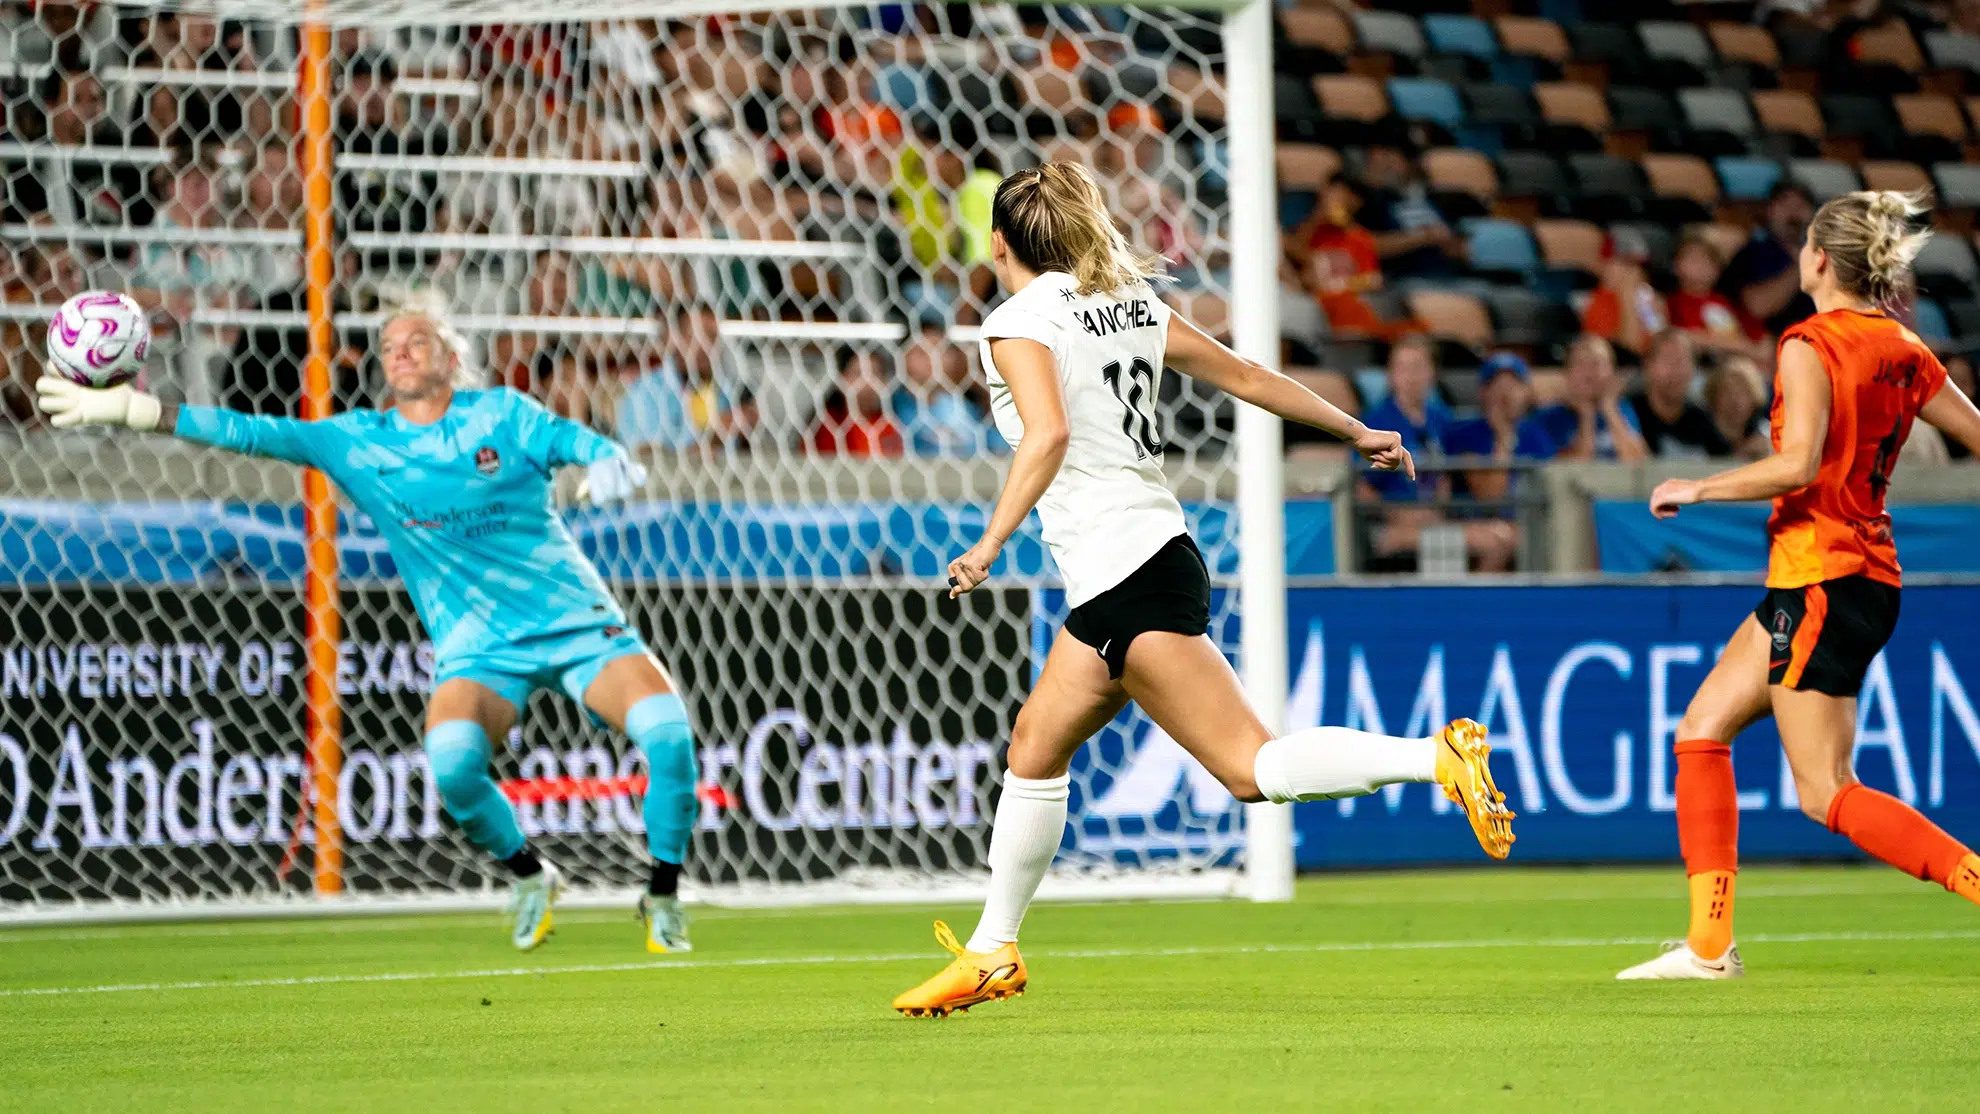 Ashley Sanchez in a white top, black shorts, white socks and orange cleats watches the soccer ball she kicked fly towards the goal. Jane Campbell in a bright blue goal uniform stretches out her right arm to save it but is just a bit short.